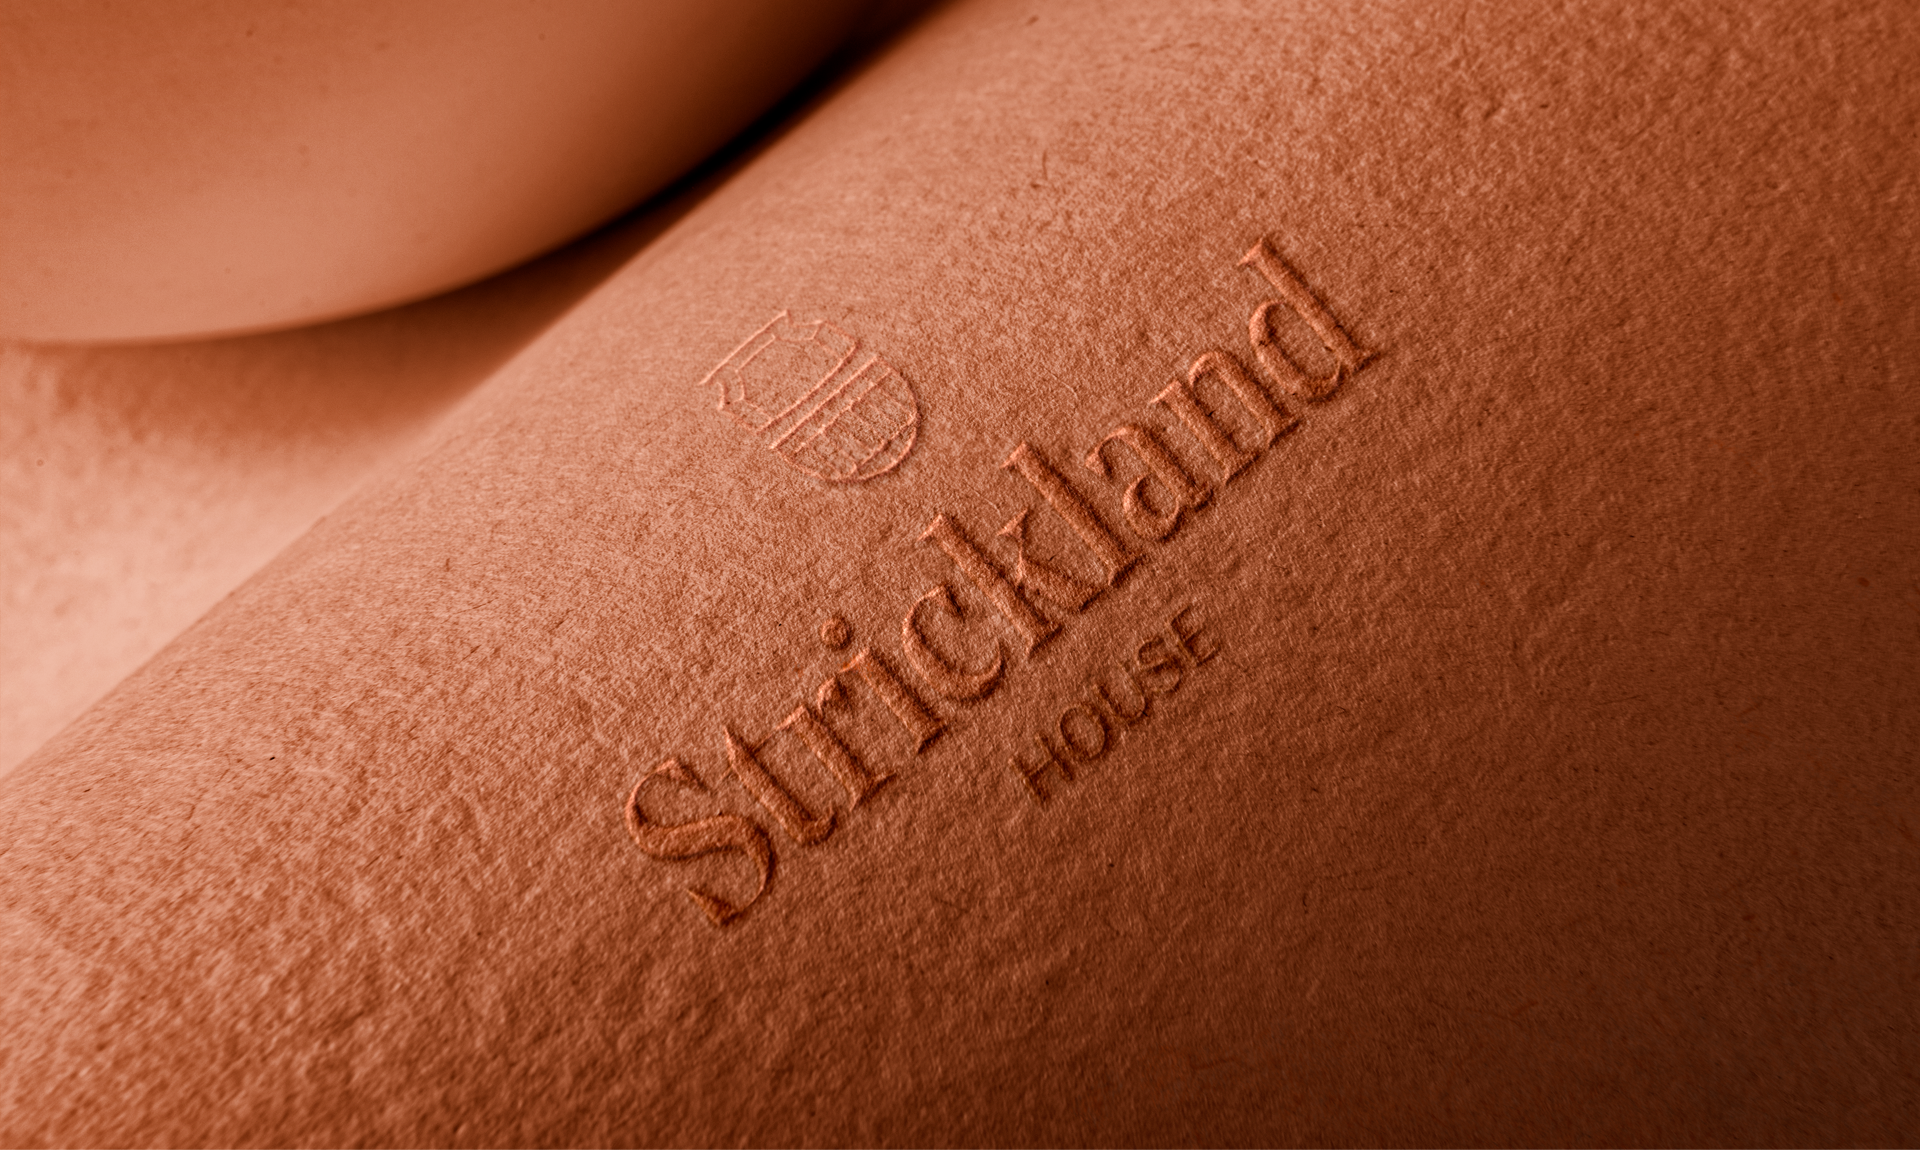 Strickland house logo on leather